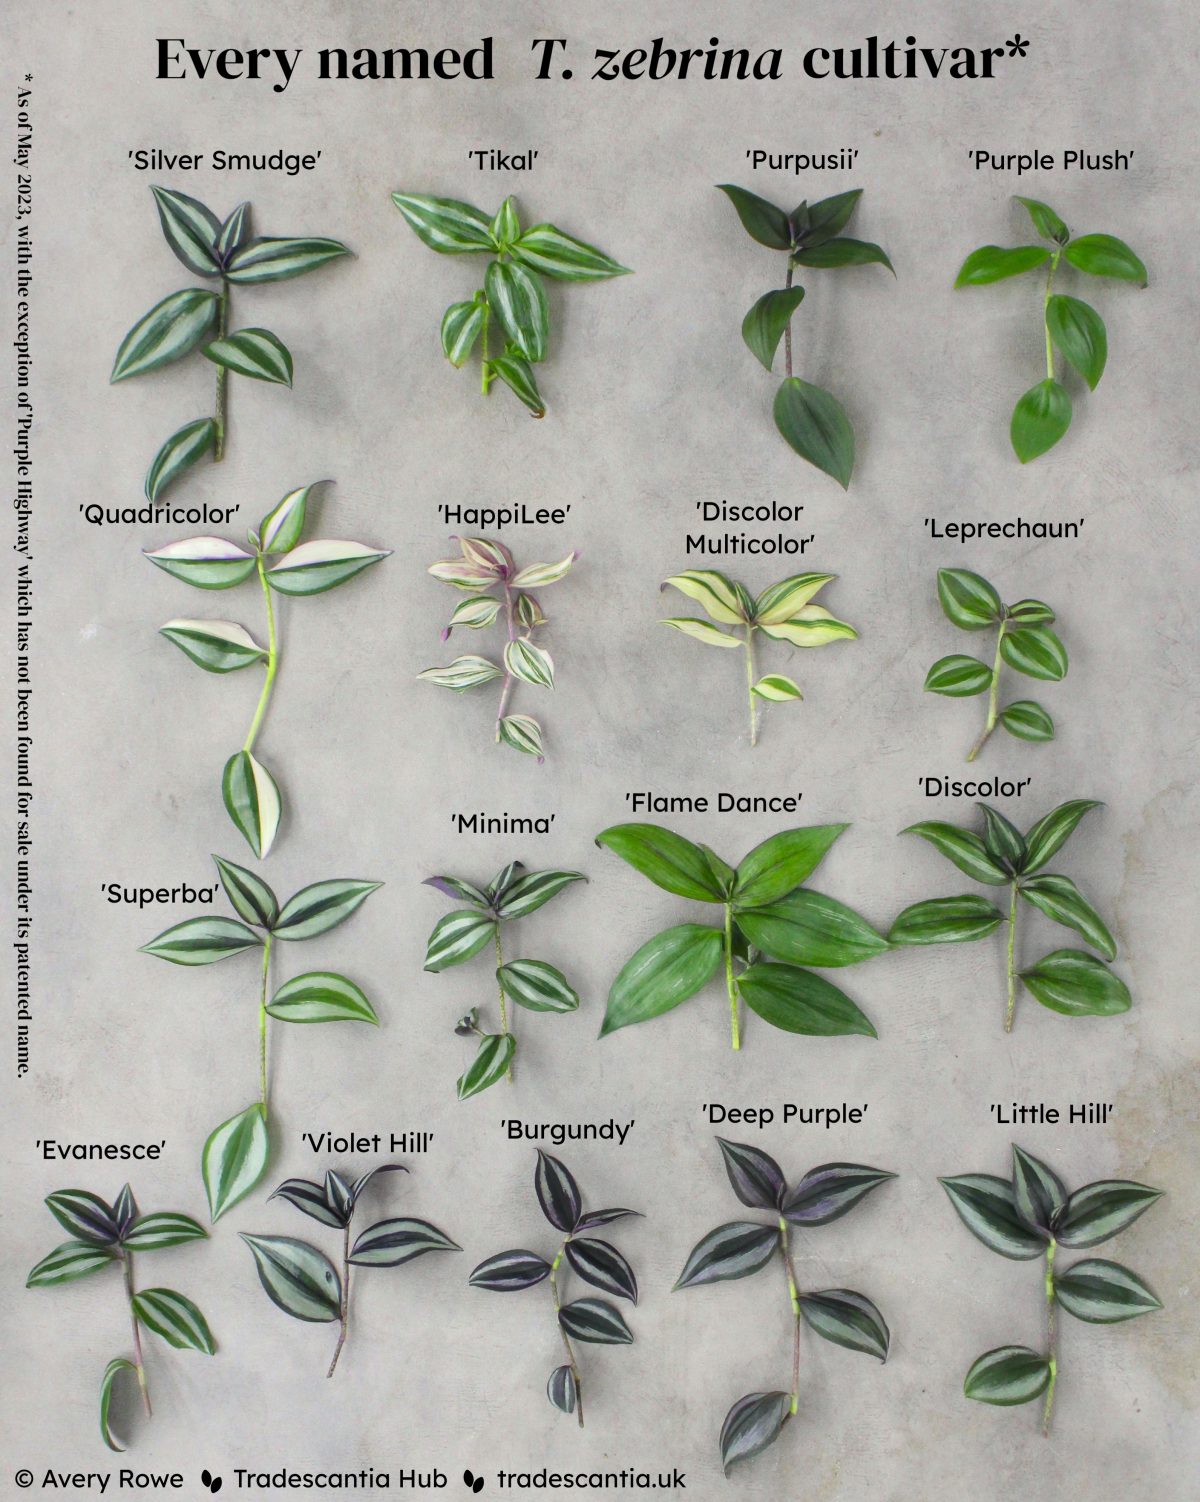 Image titled "Every named T. zebrina cultivar", with seventeen different colourful cuttings laid out in rows and labelled: 'Silver Smudge', 'Tikal', 'Purpusii', 'Purple Plush', 'Quadricolor', 'HappiLee', 'Discolor Multicolor', 'Leprechaun', 'Superba', 'Minima', 'Flame Dance', 'Discolor', 'Evanesce', 'Violet Hill', 'Burgundy', 'Deep Purple', and 'Little Hill'. A footnote reads "As of May 2023, excluding 'Purple Highway', which has not been found for sale under its patented name".